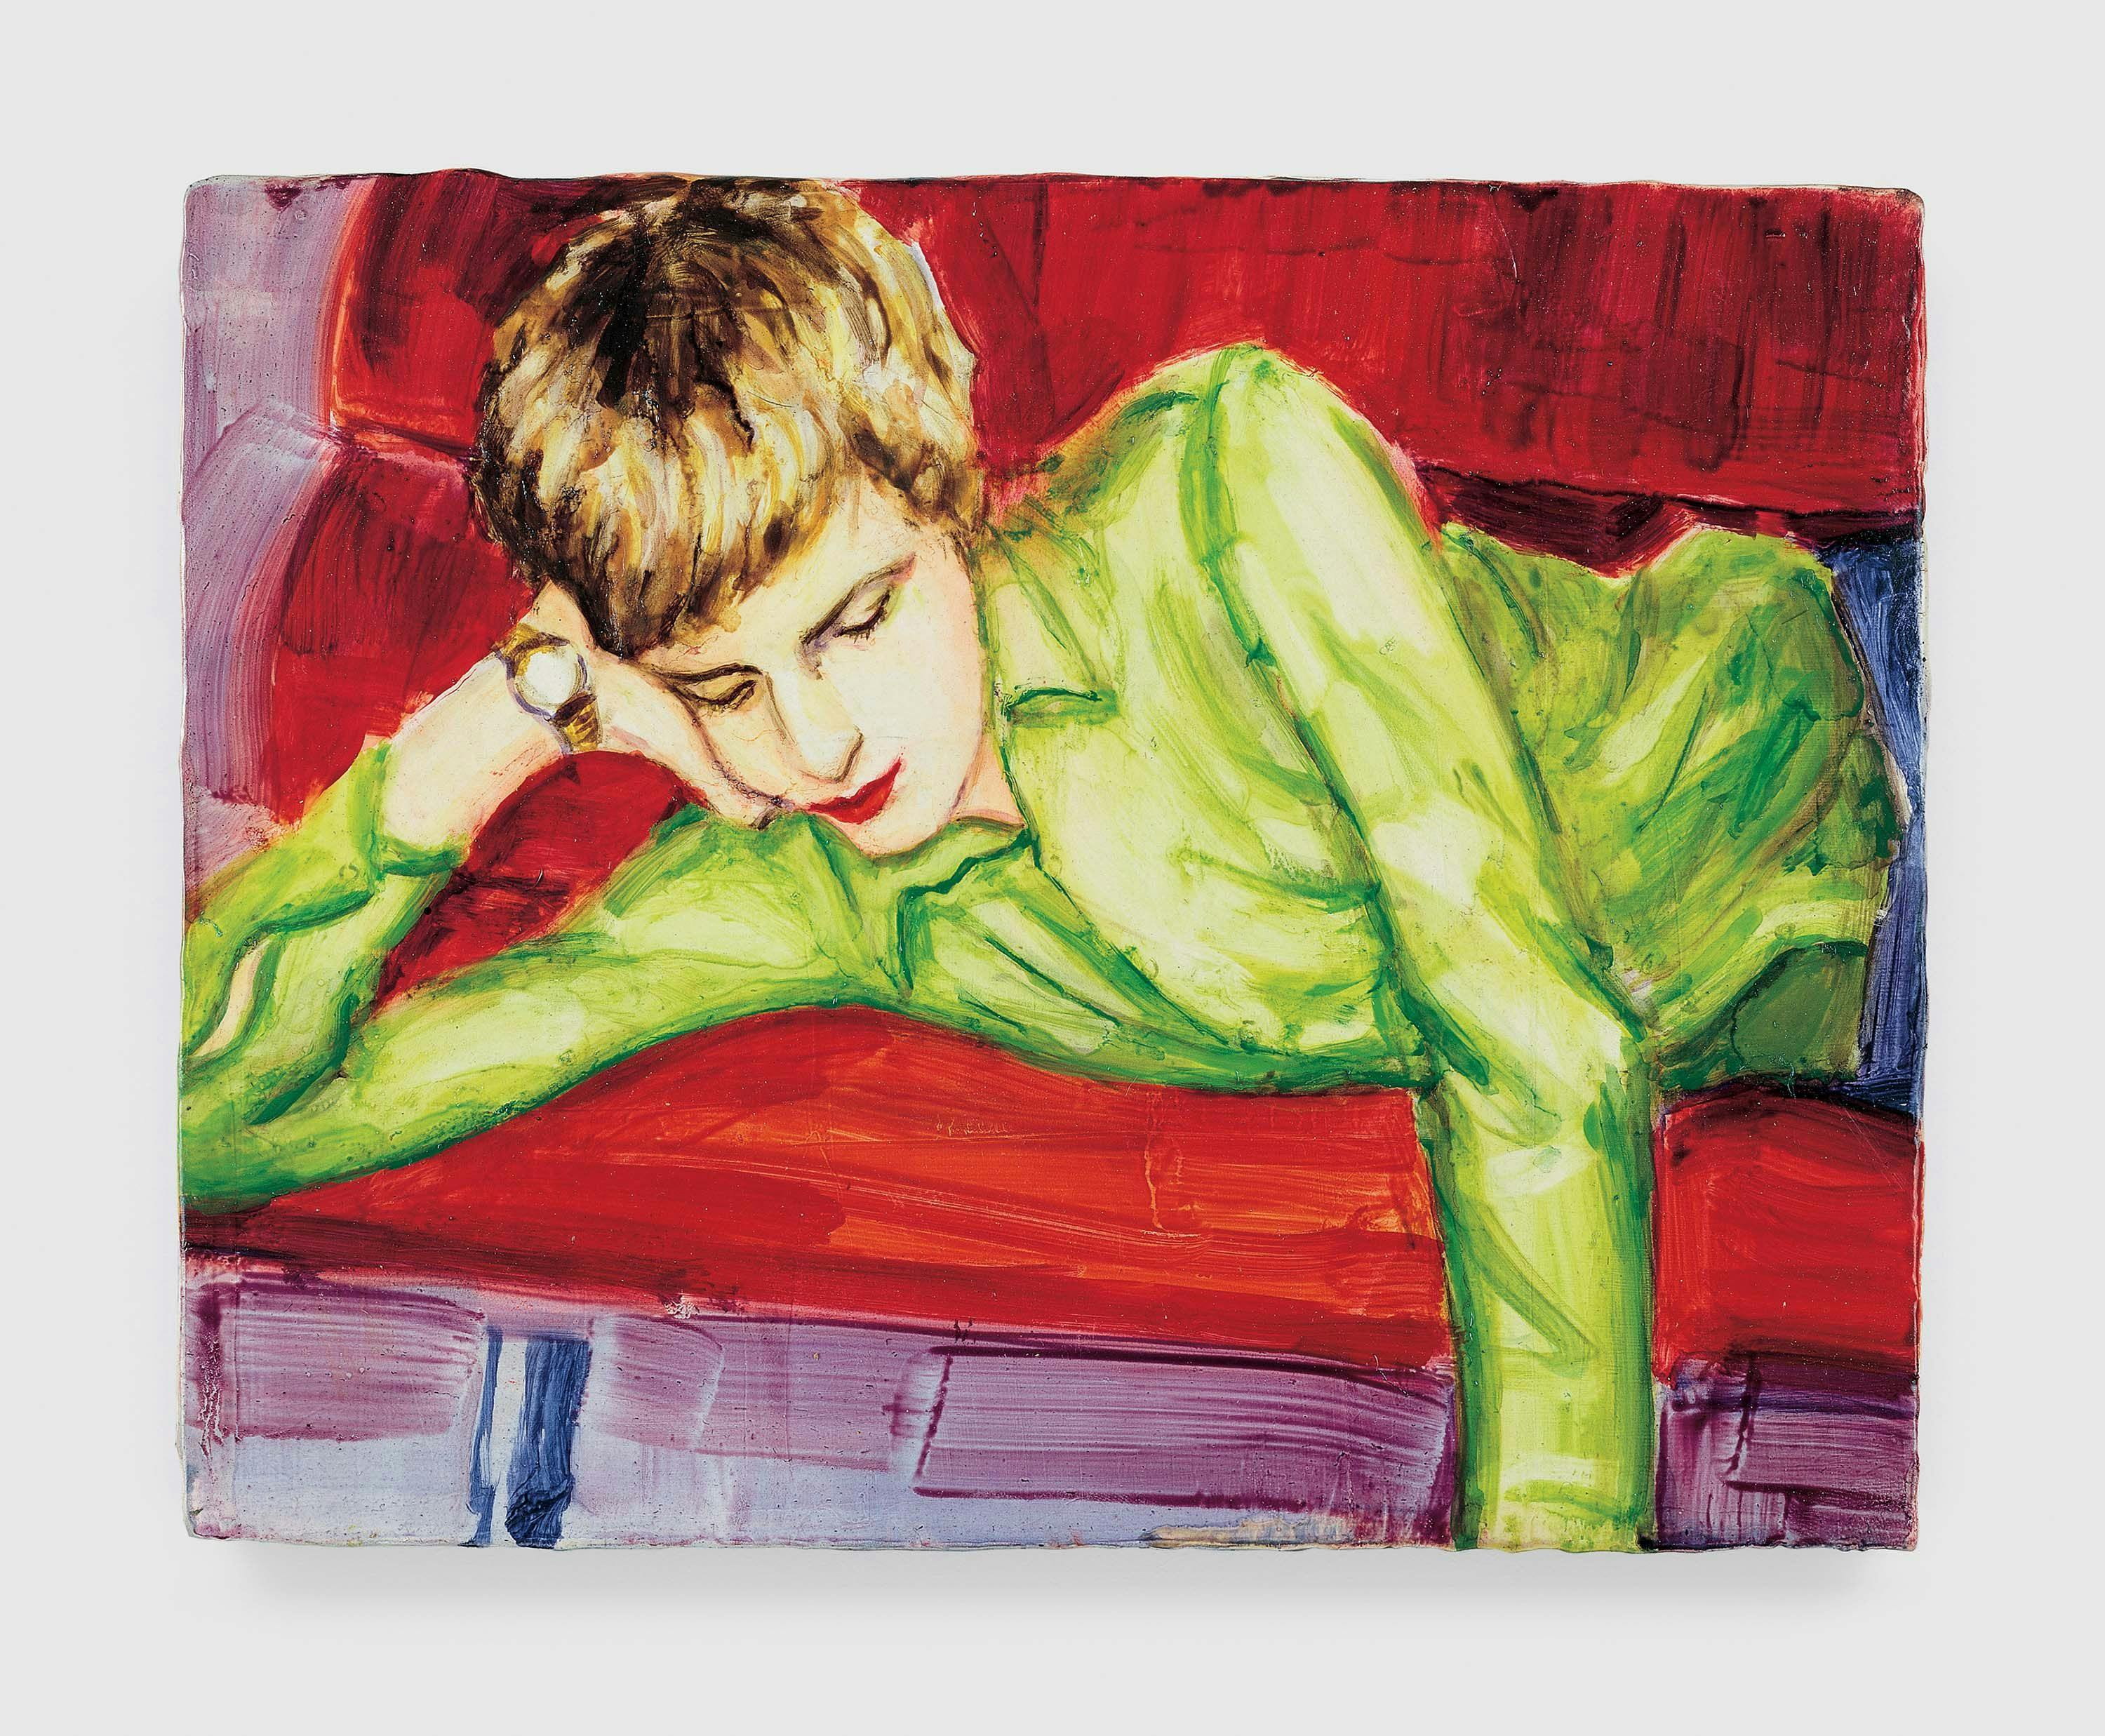 A painting by Elizabeth Peyton, titled Piotr on couch, dated 1996.